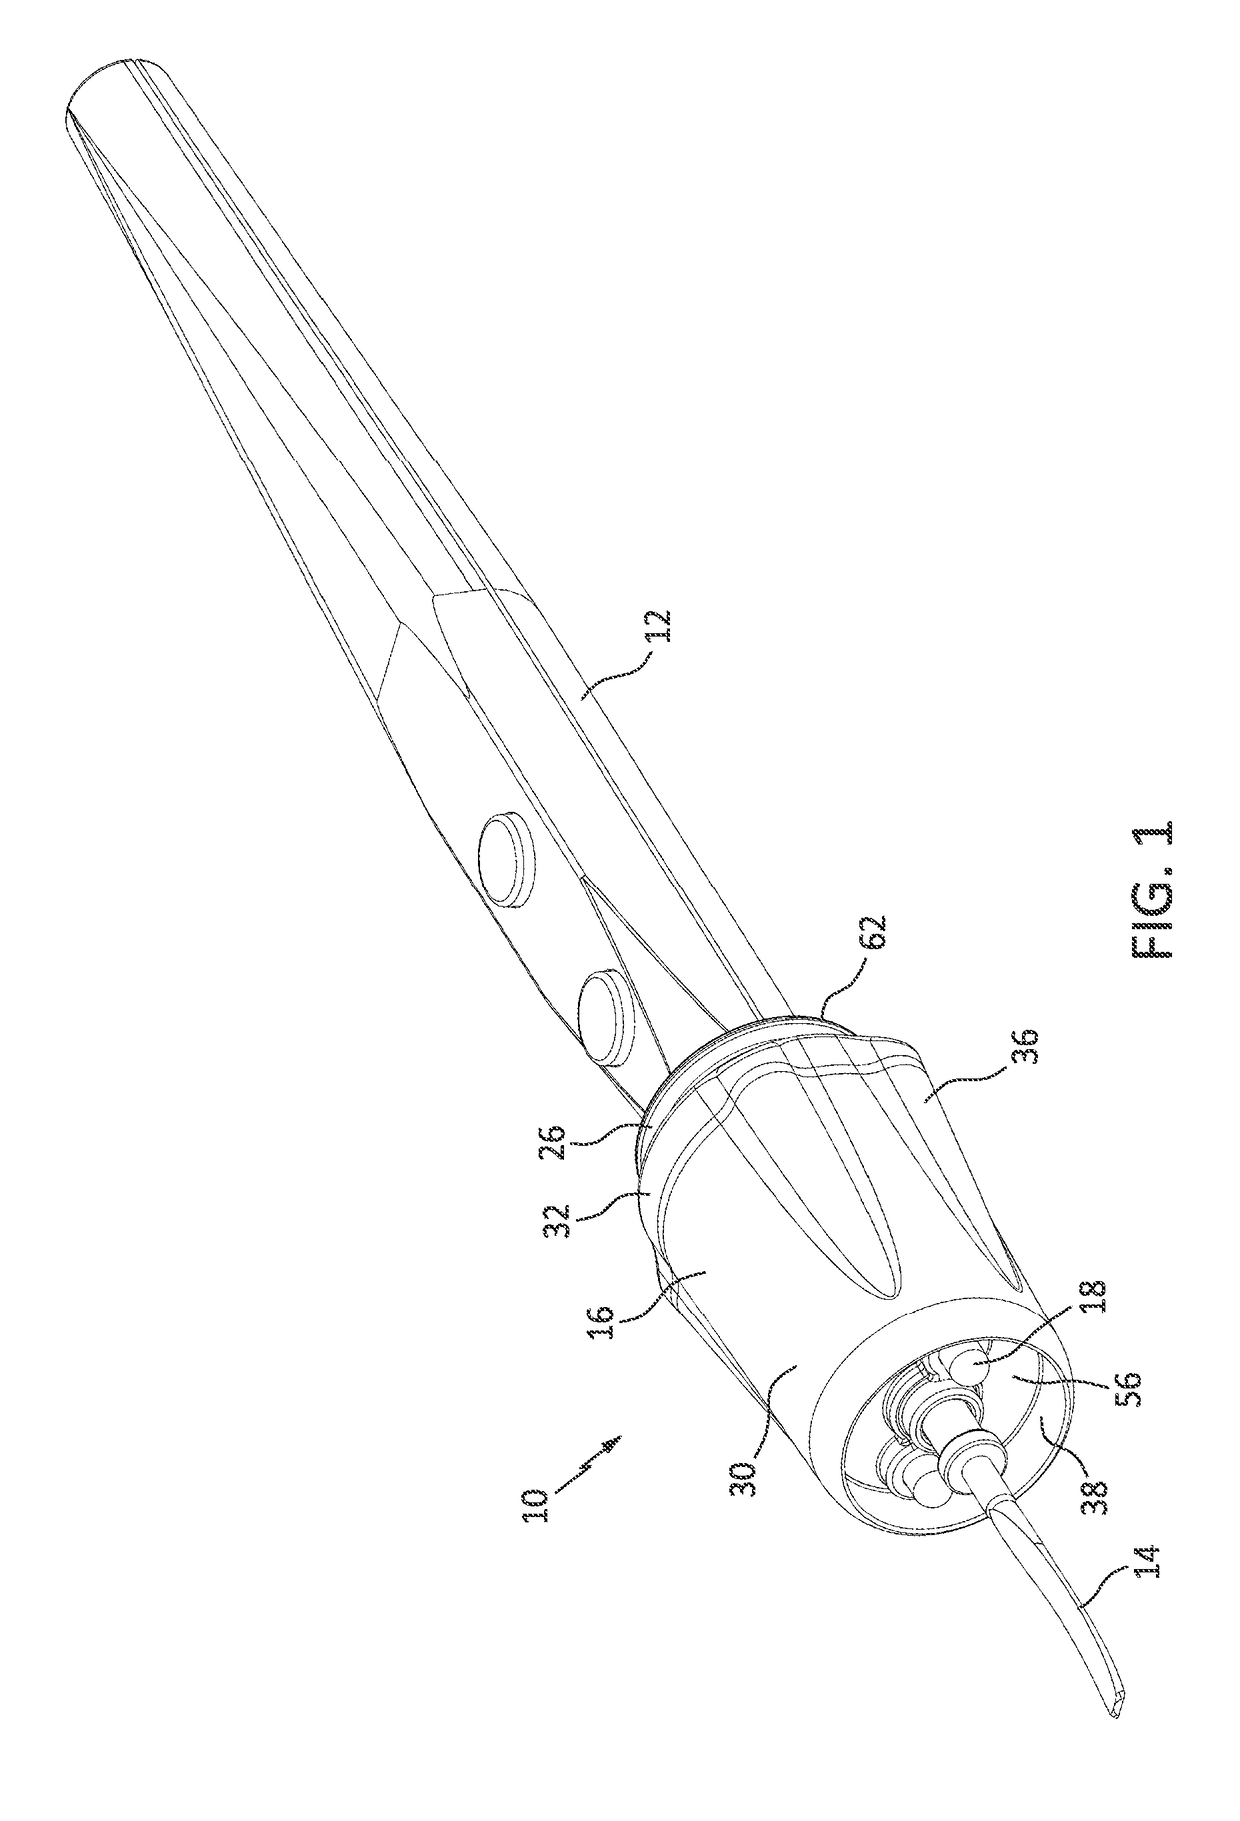 Lighting device for attachment to a tool